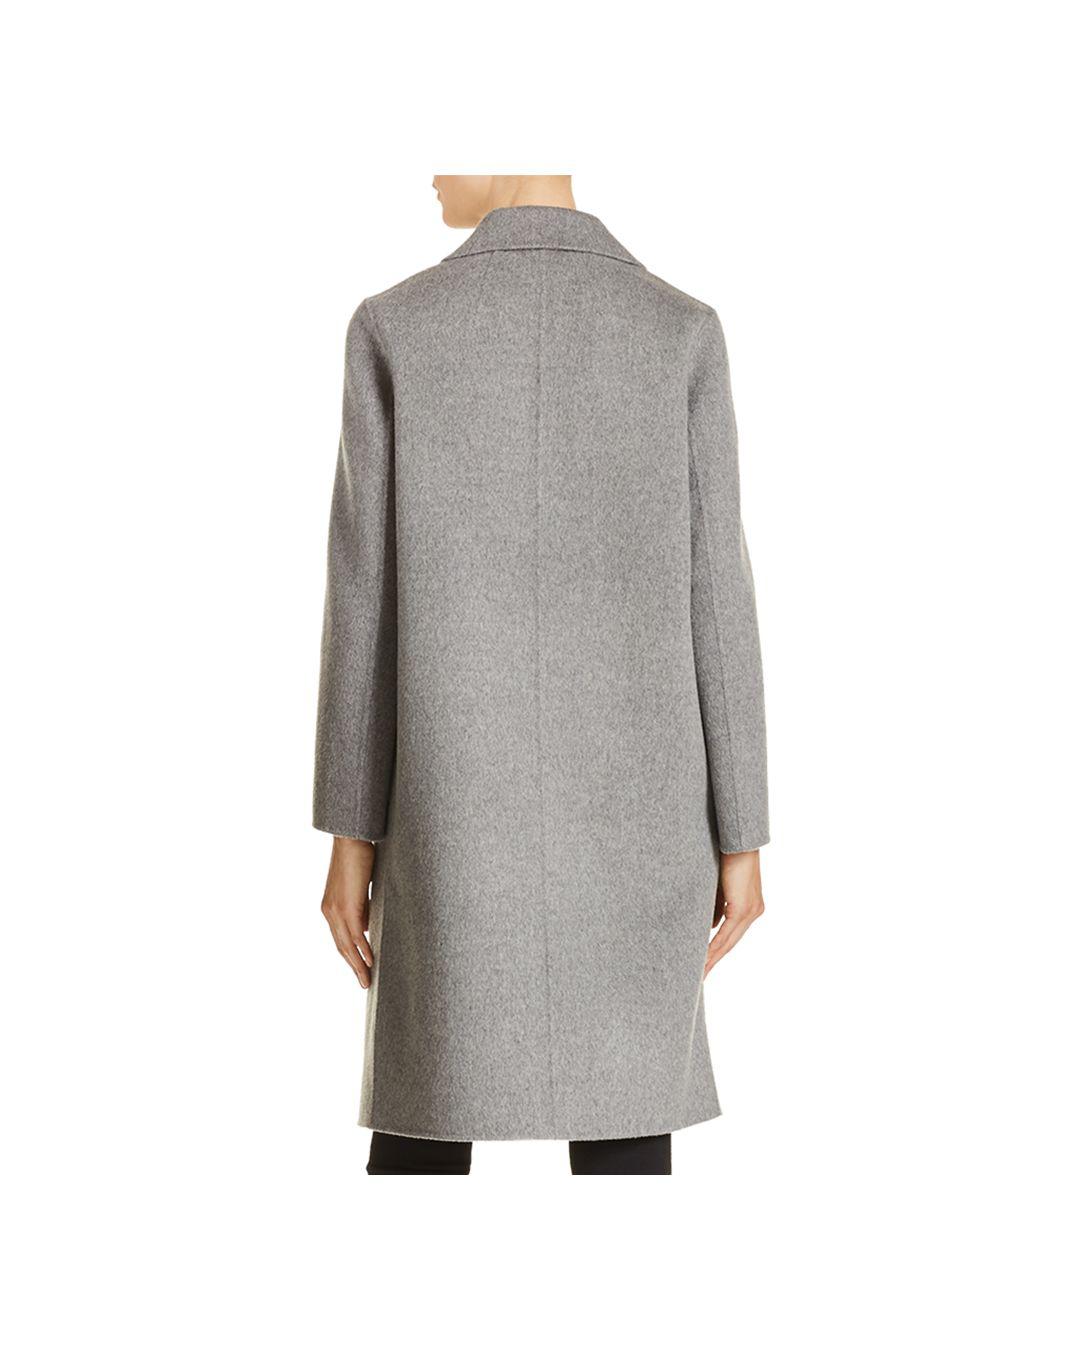 Theory Clairene Wool & Cashmere Coat in Gray - Lyst